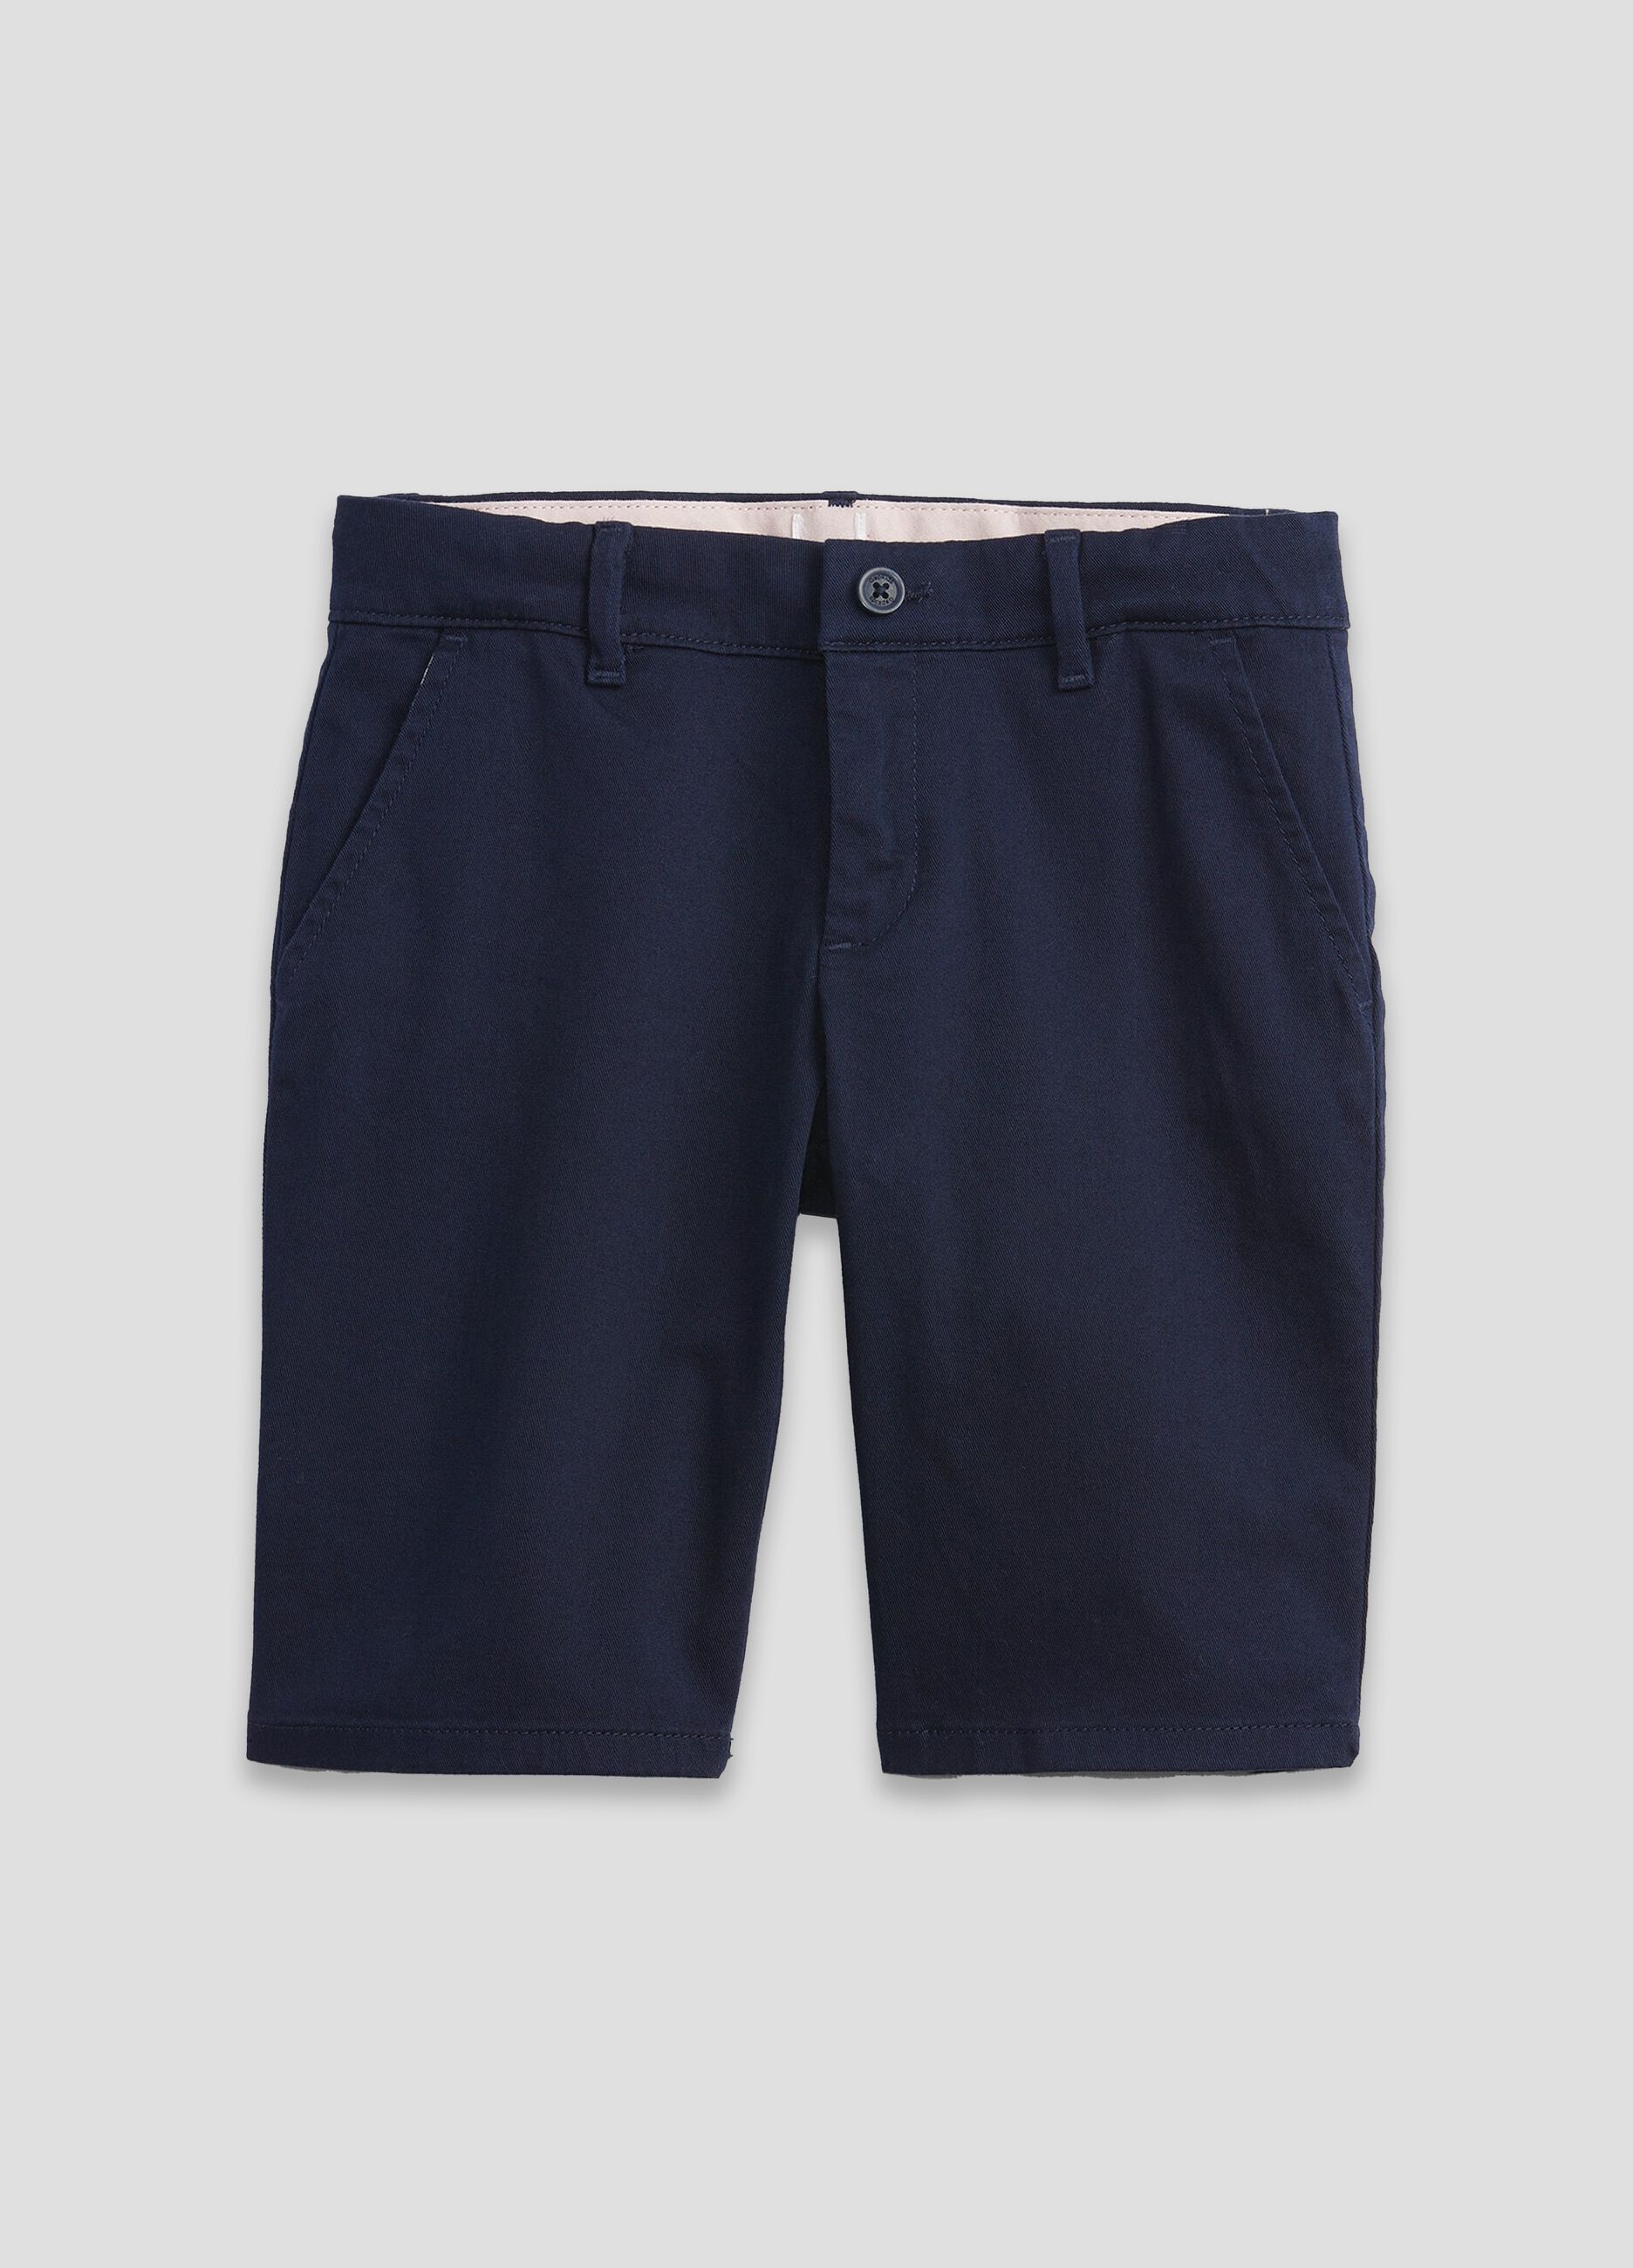 Solid colour Bermuda shorts with pockets